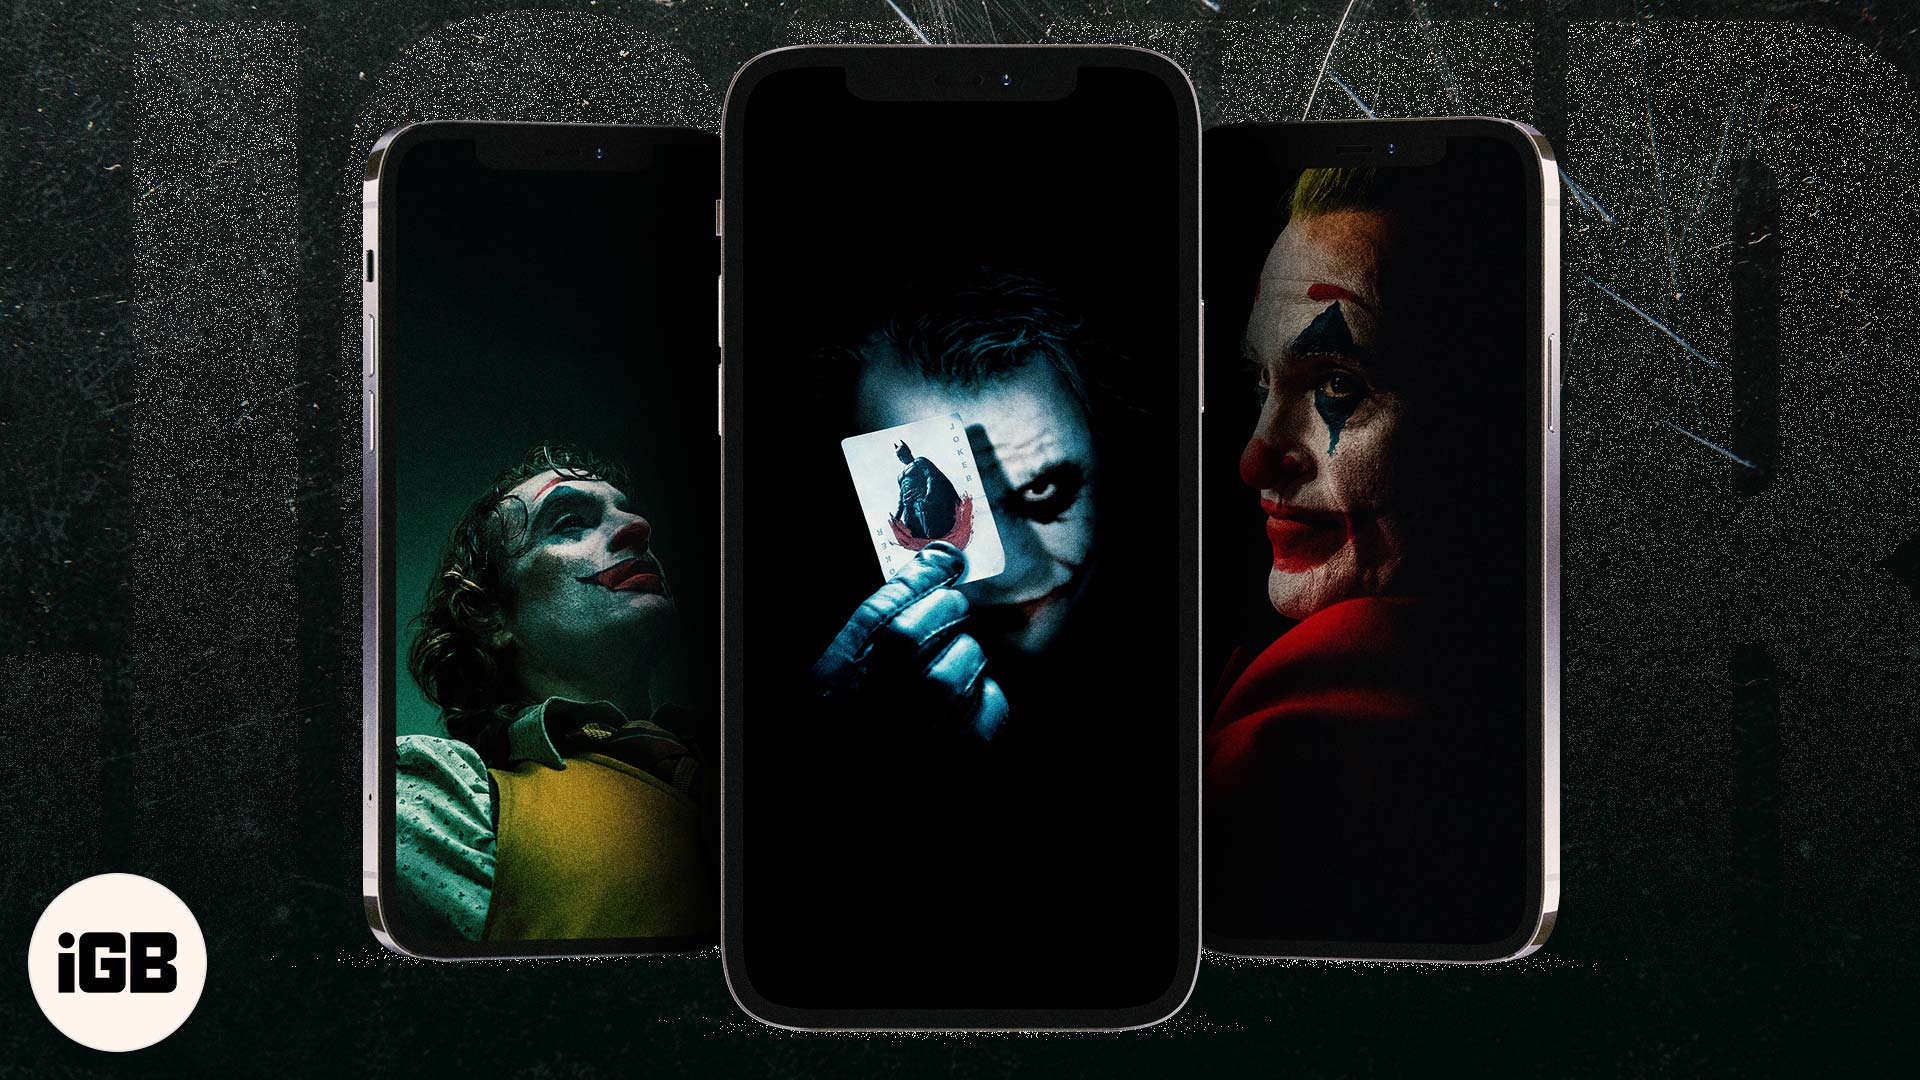 Free joker wallpapers for iphone in